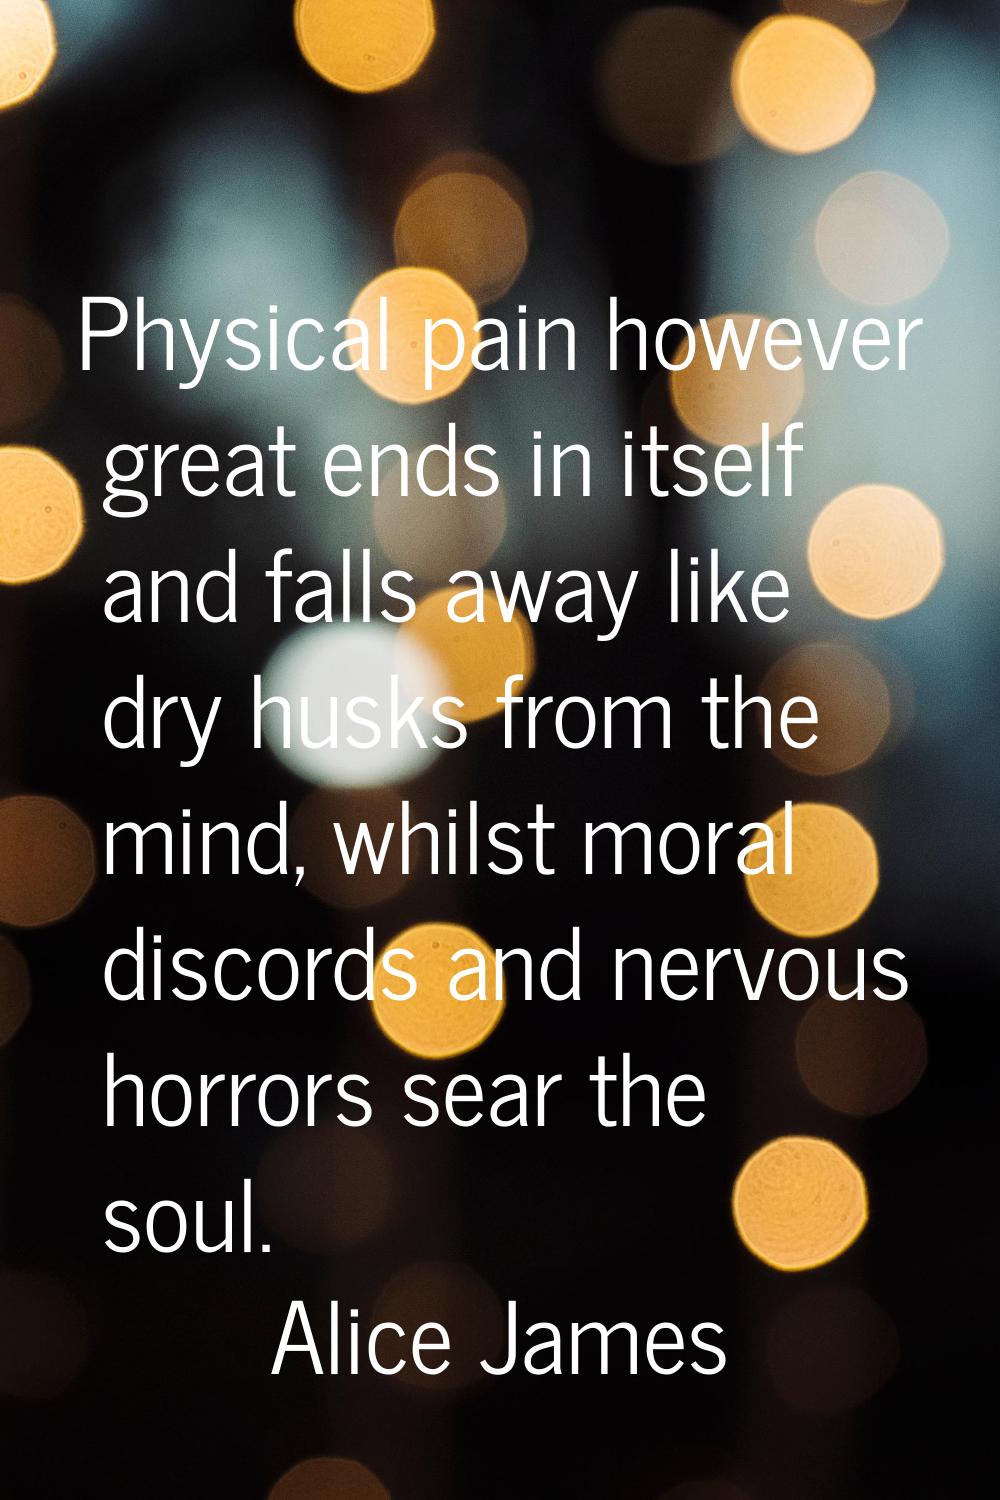 Physical pain however great ends in itself and falls away like dry husks from the mind, whilst mora